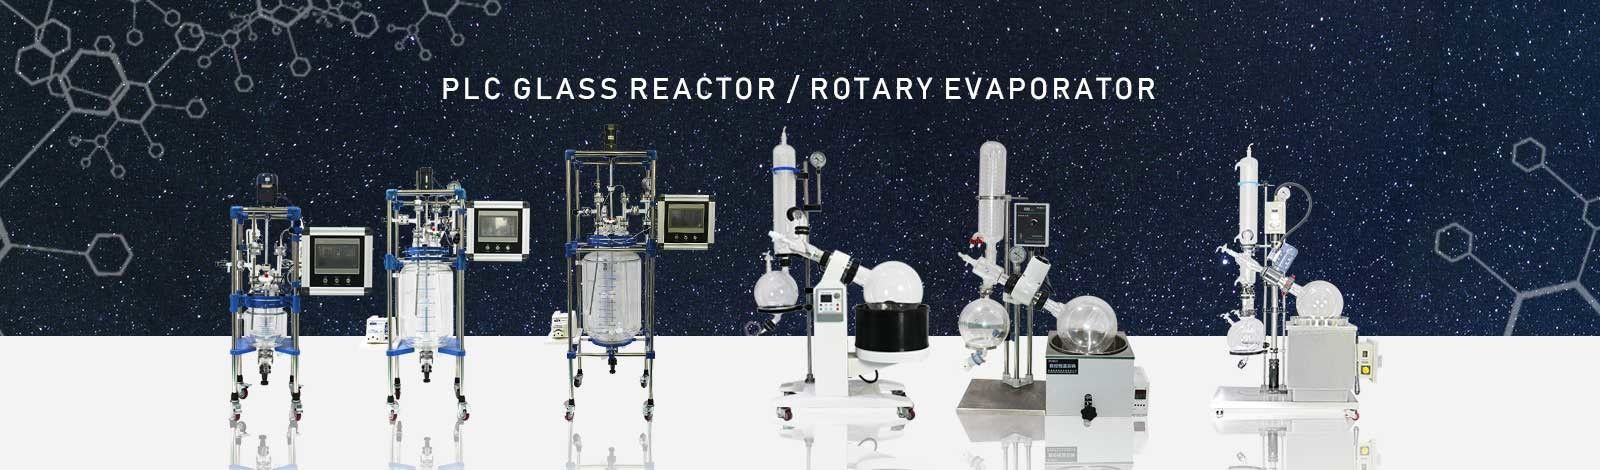 Jacketed Glass Reactor Vessel